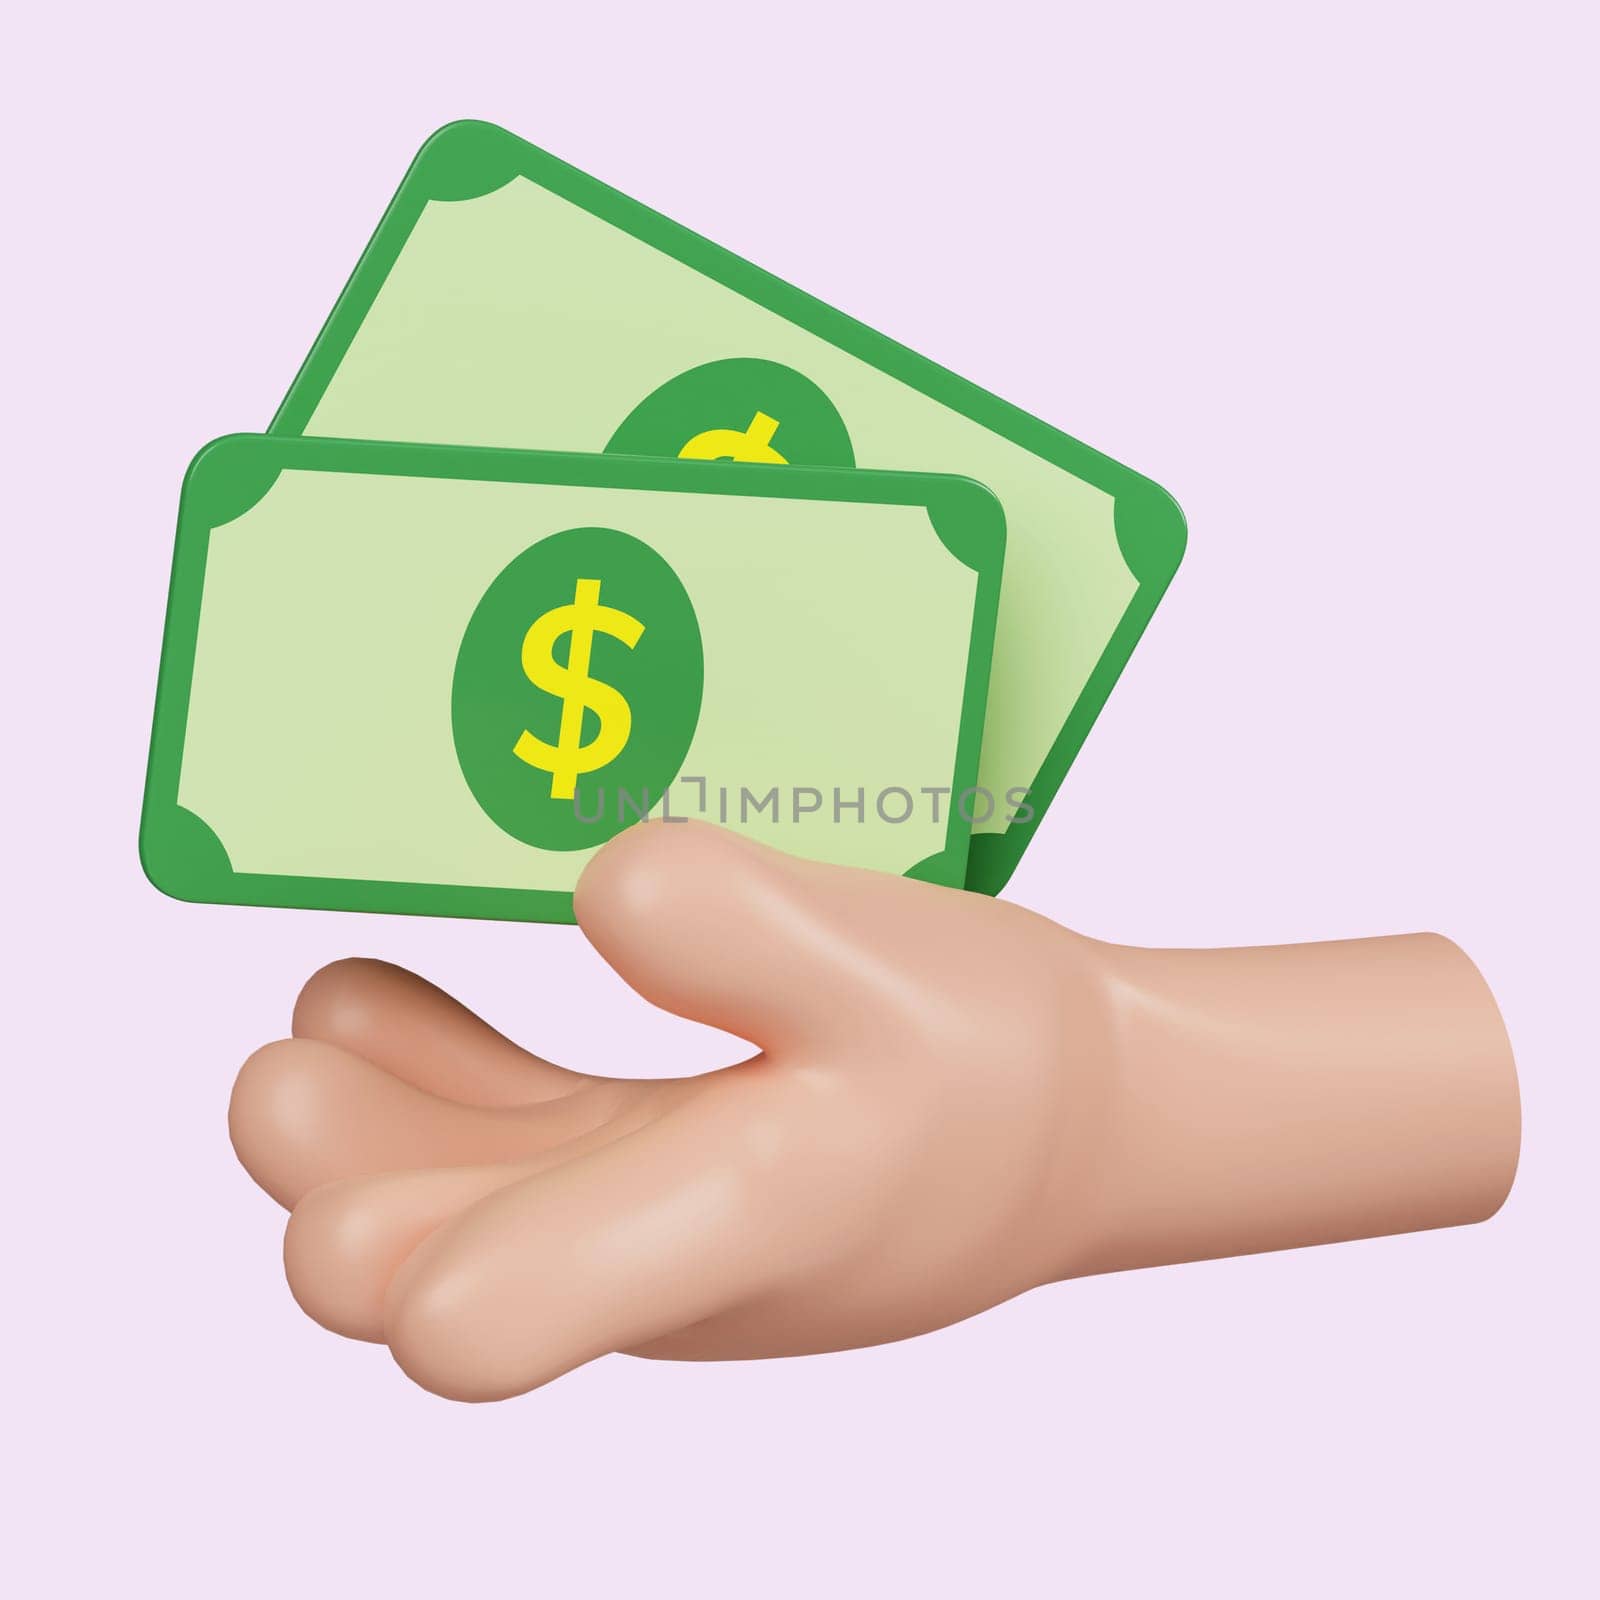 3d hand holding money. payment concept. finance, investment, money saving on hand. icon isolated on pink background. 3d rendering illustration. Clipping path..